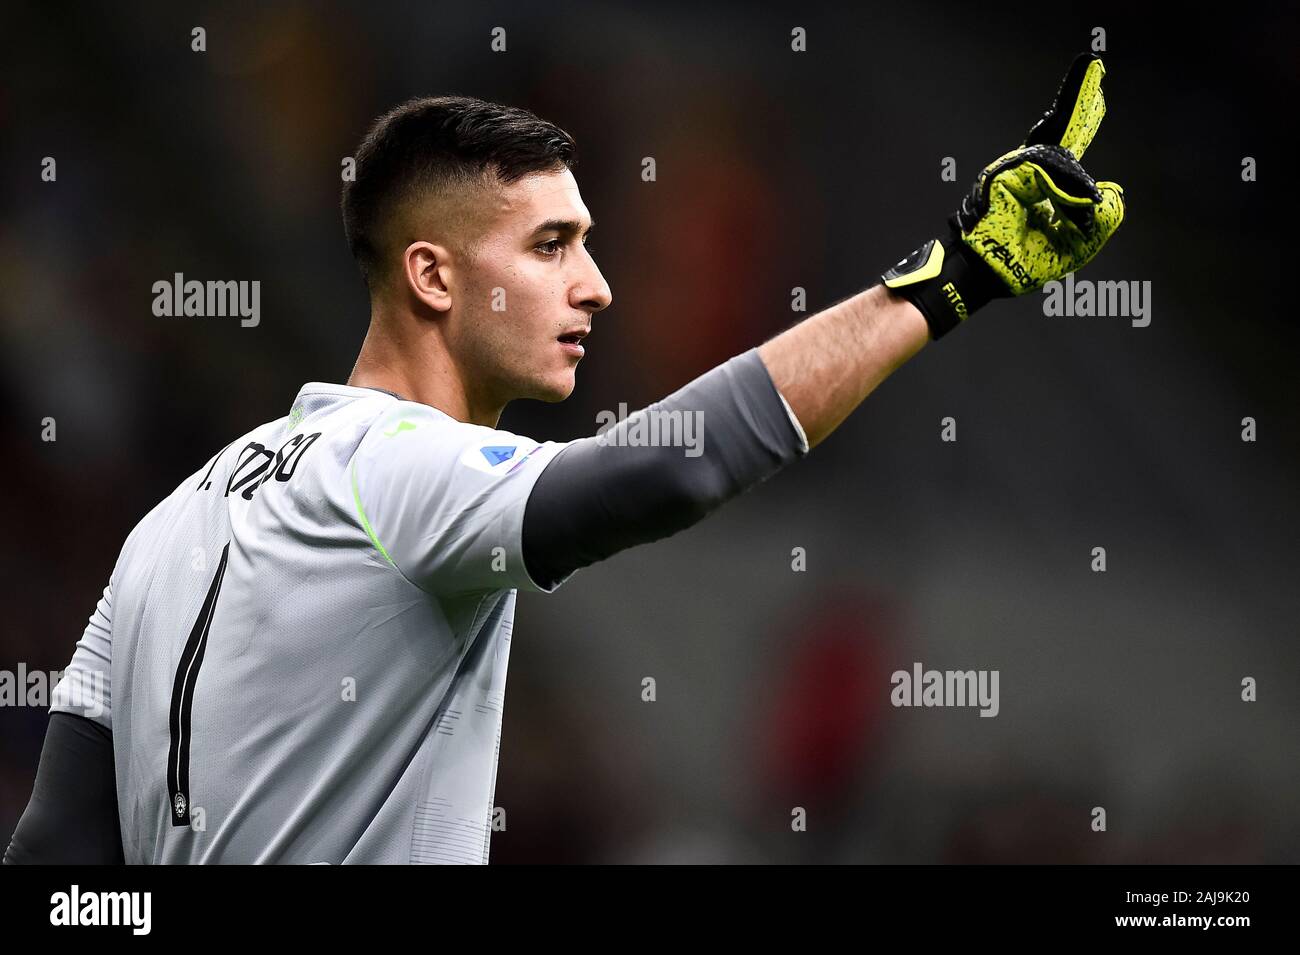 Milan, Italy. 14 September, 2019: Juan Musso of Udinese Calcio gestures during the Serie A football match between FC Internazionale and Udinese Calcio. FC Internazionale won 1-0 over Udinese Calcio. Credit: Nicolò Campo/Alamy Live News Stock Photo